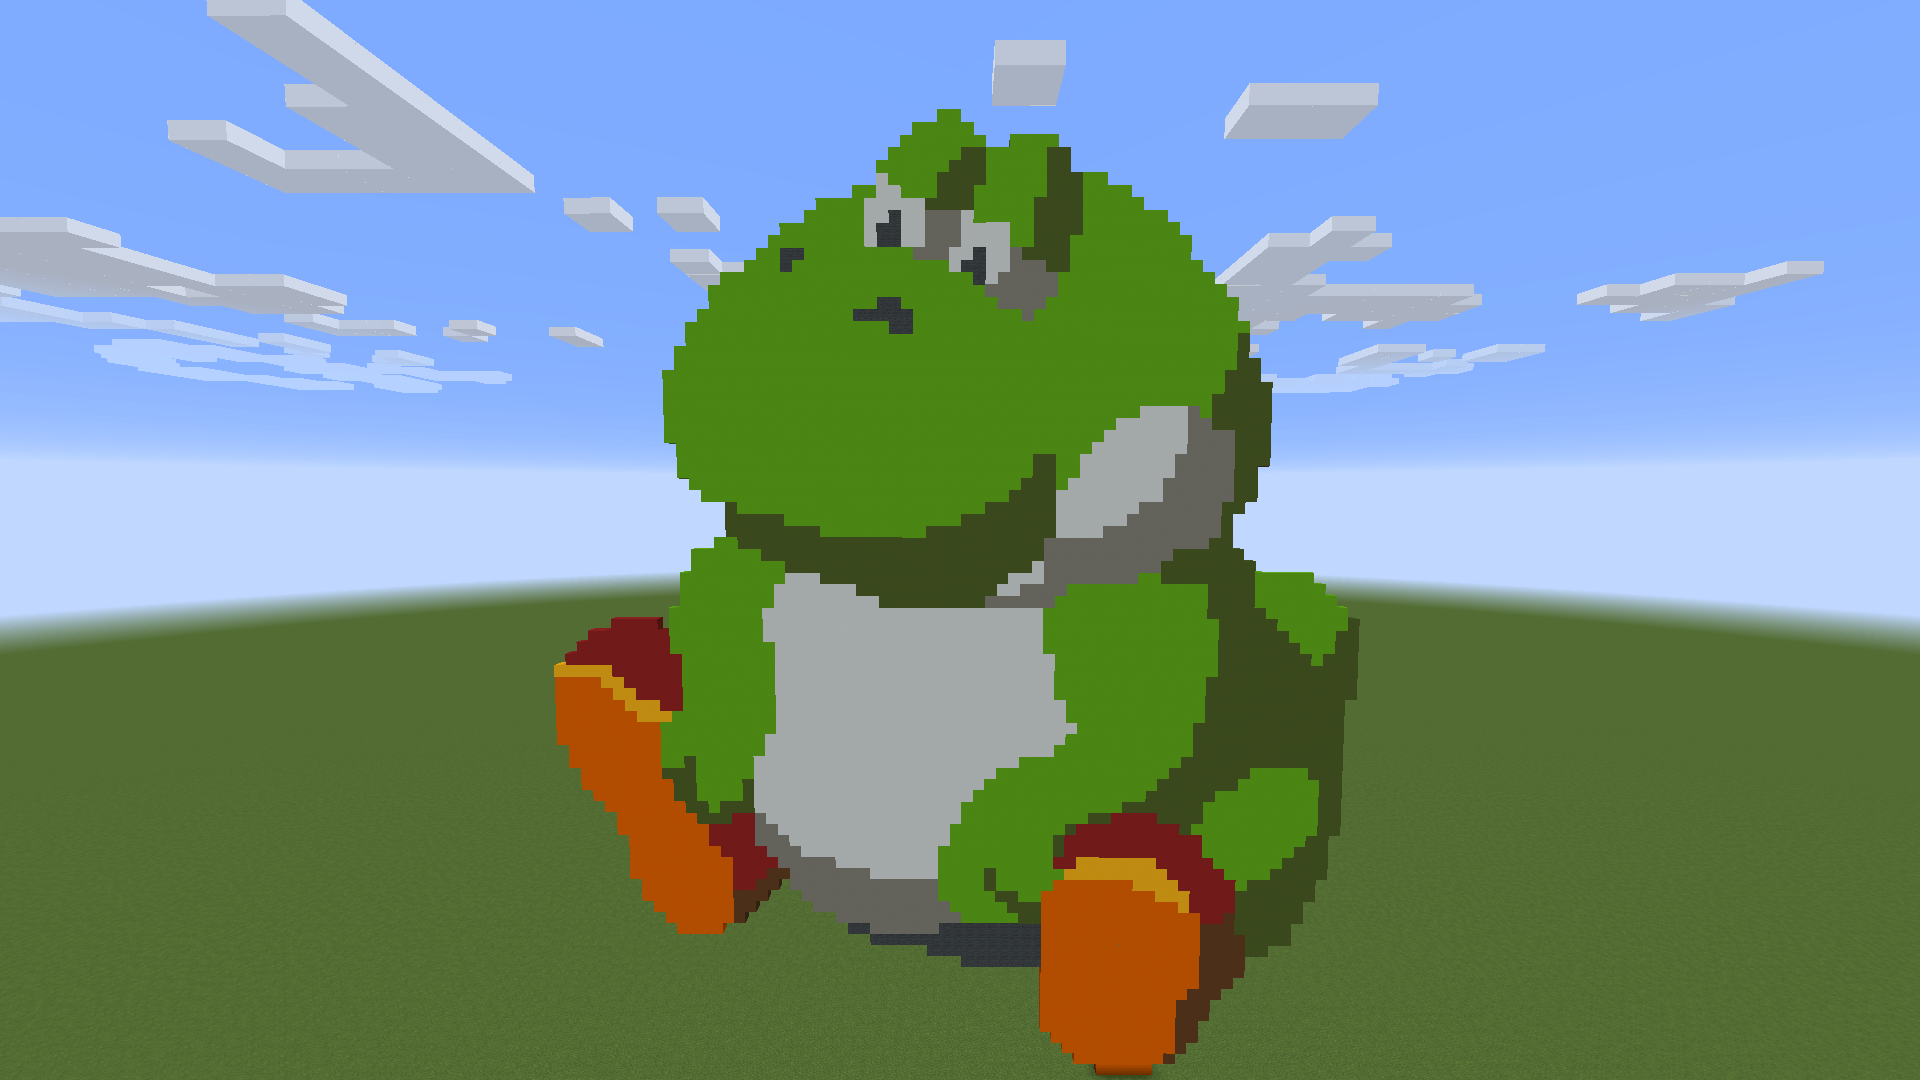 A fat Yoshi that made around and hour for me to make, enjoy